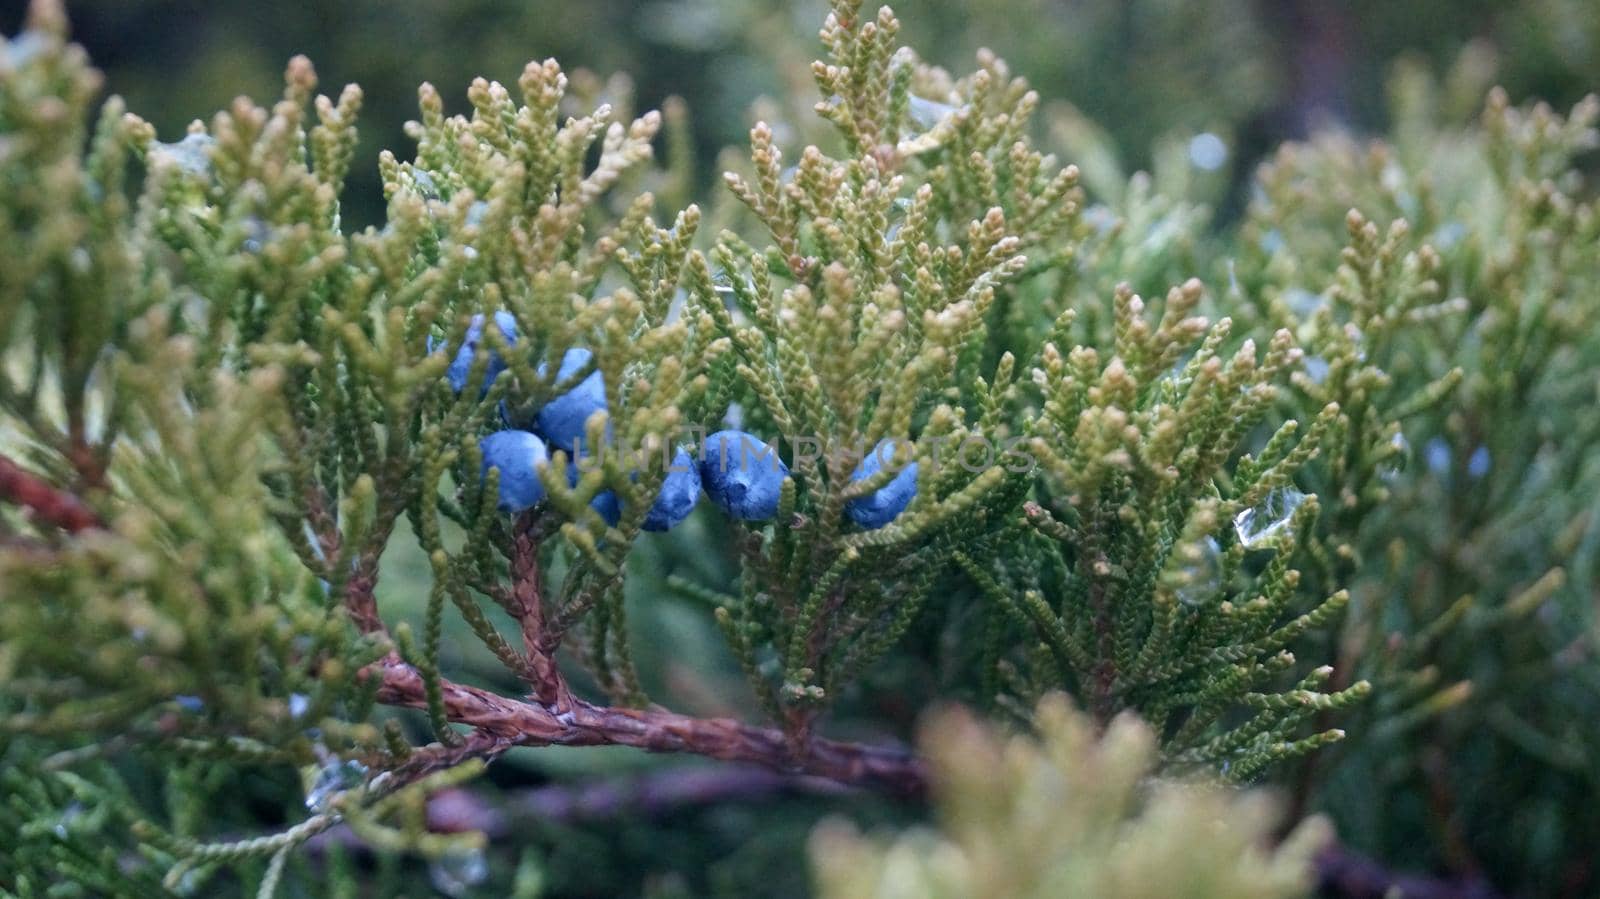 A close up of blue berries on a tree